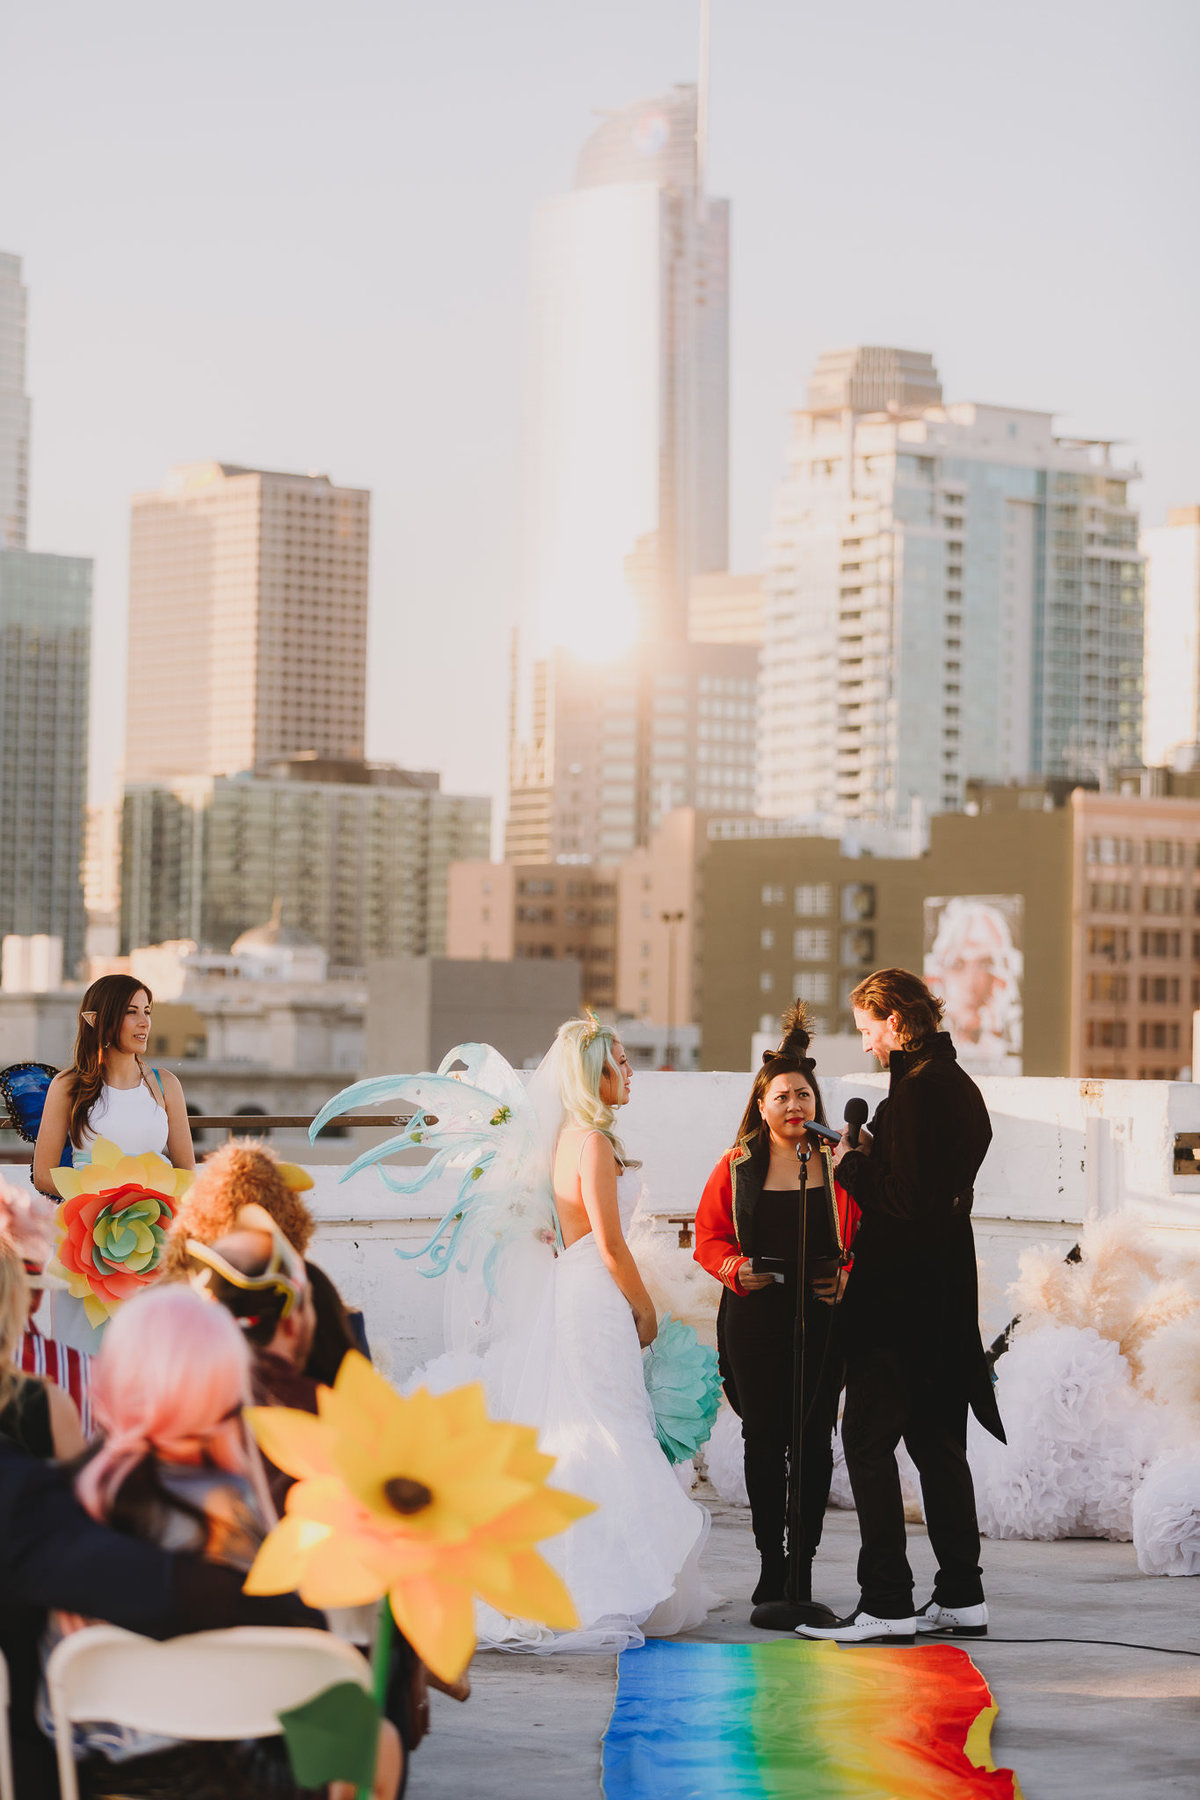 Archer Inspired Photography - Los Angeles SoCal Rooftop Wedding Art and Fashion District - Lifestyle Photographer-314